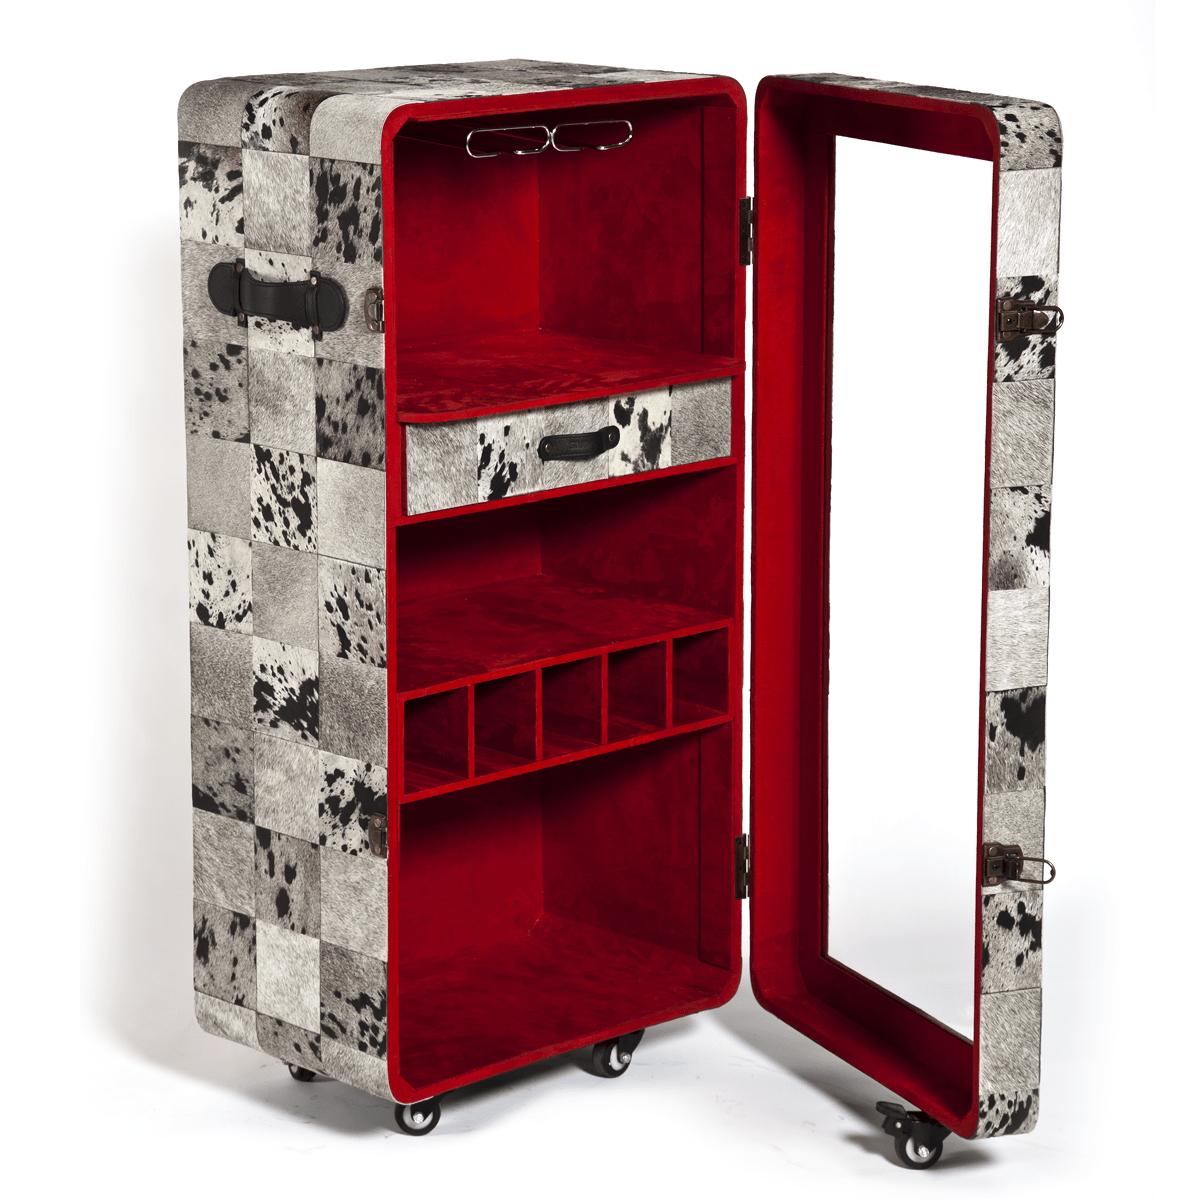 Portable Bar Cabinets Barware intended for size 1200 X 1200